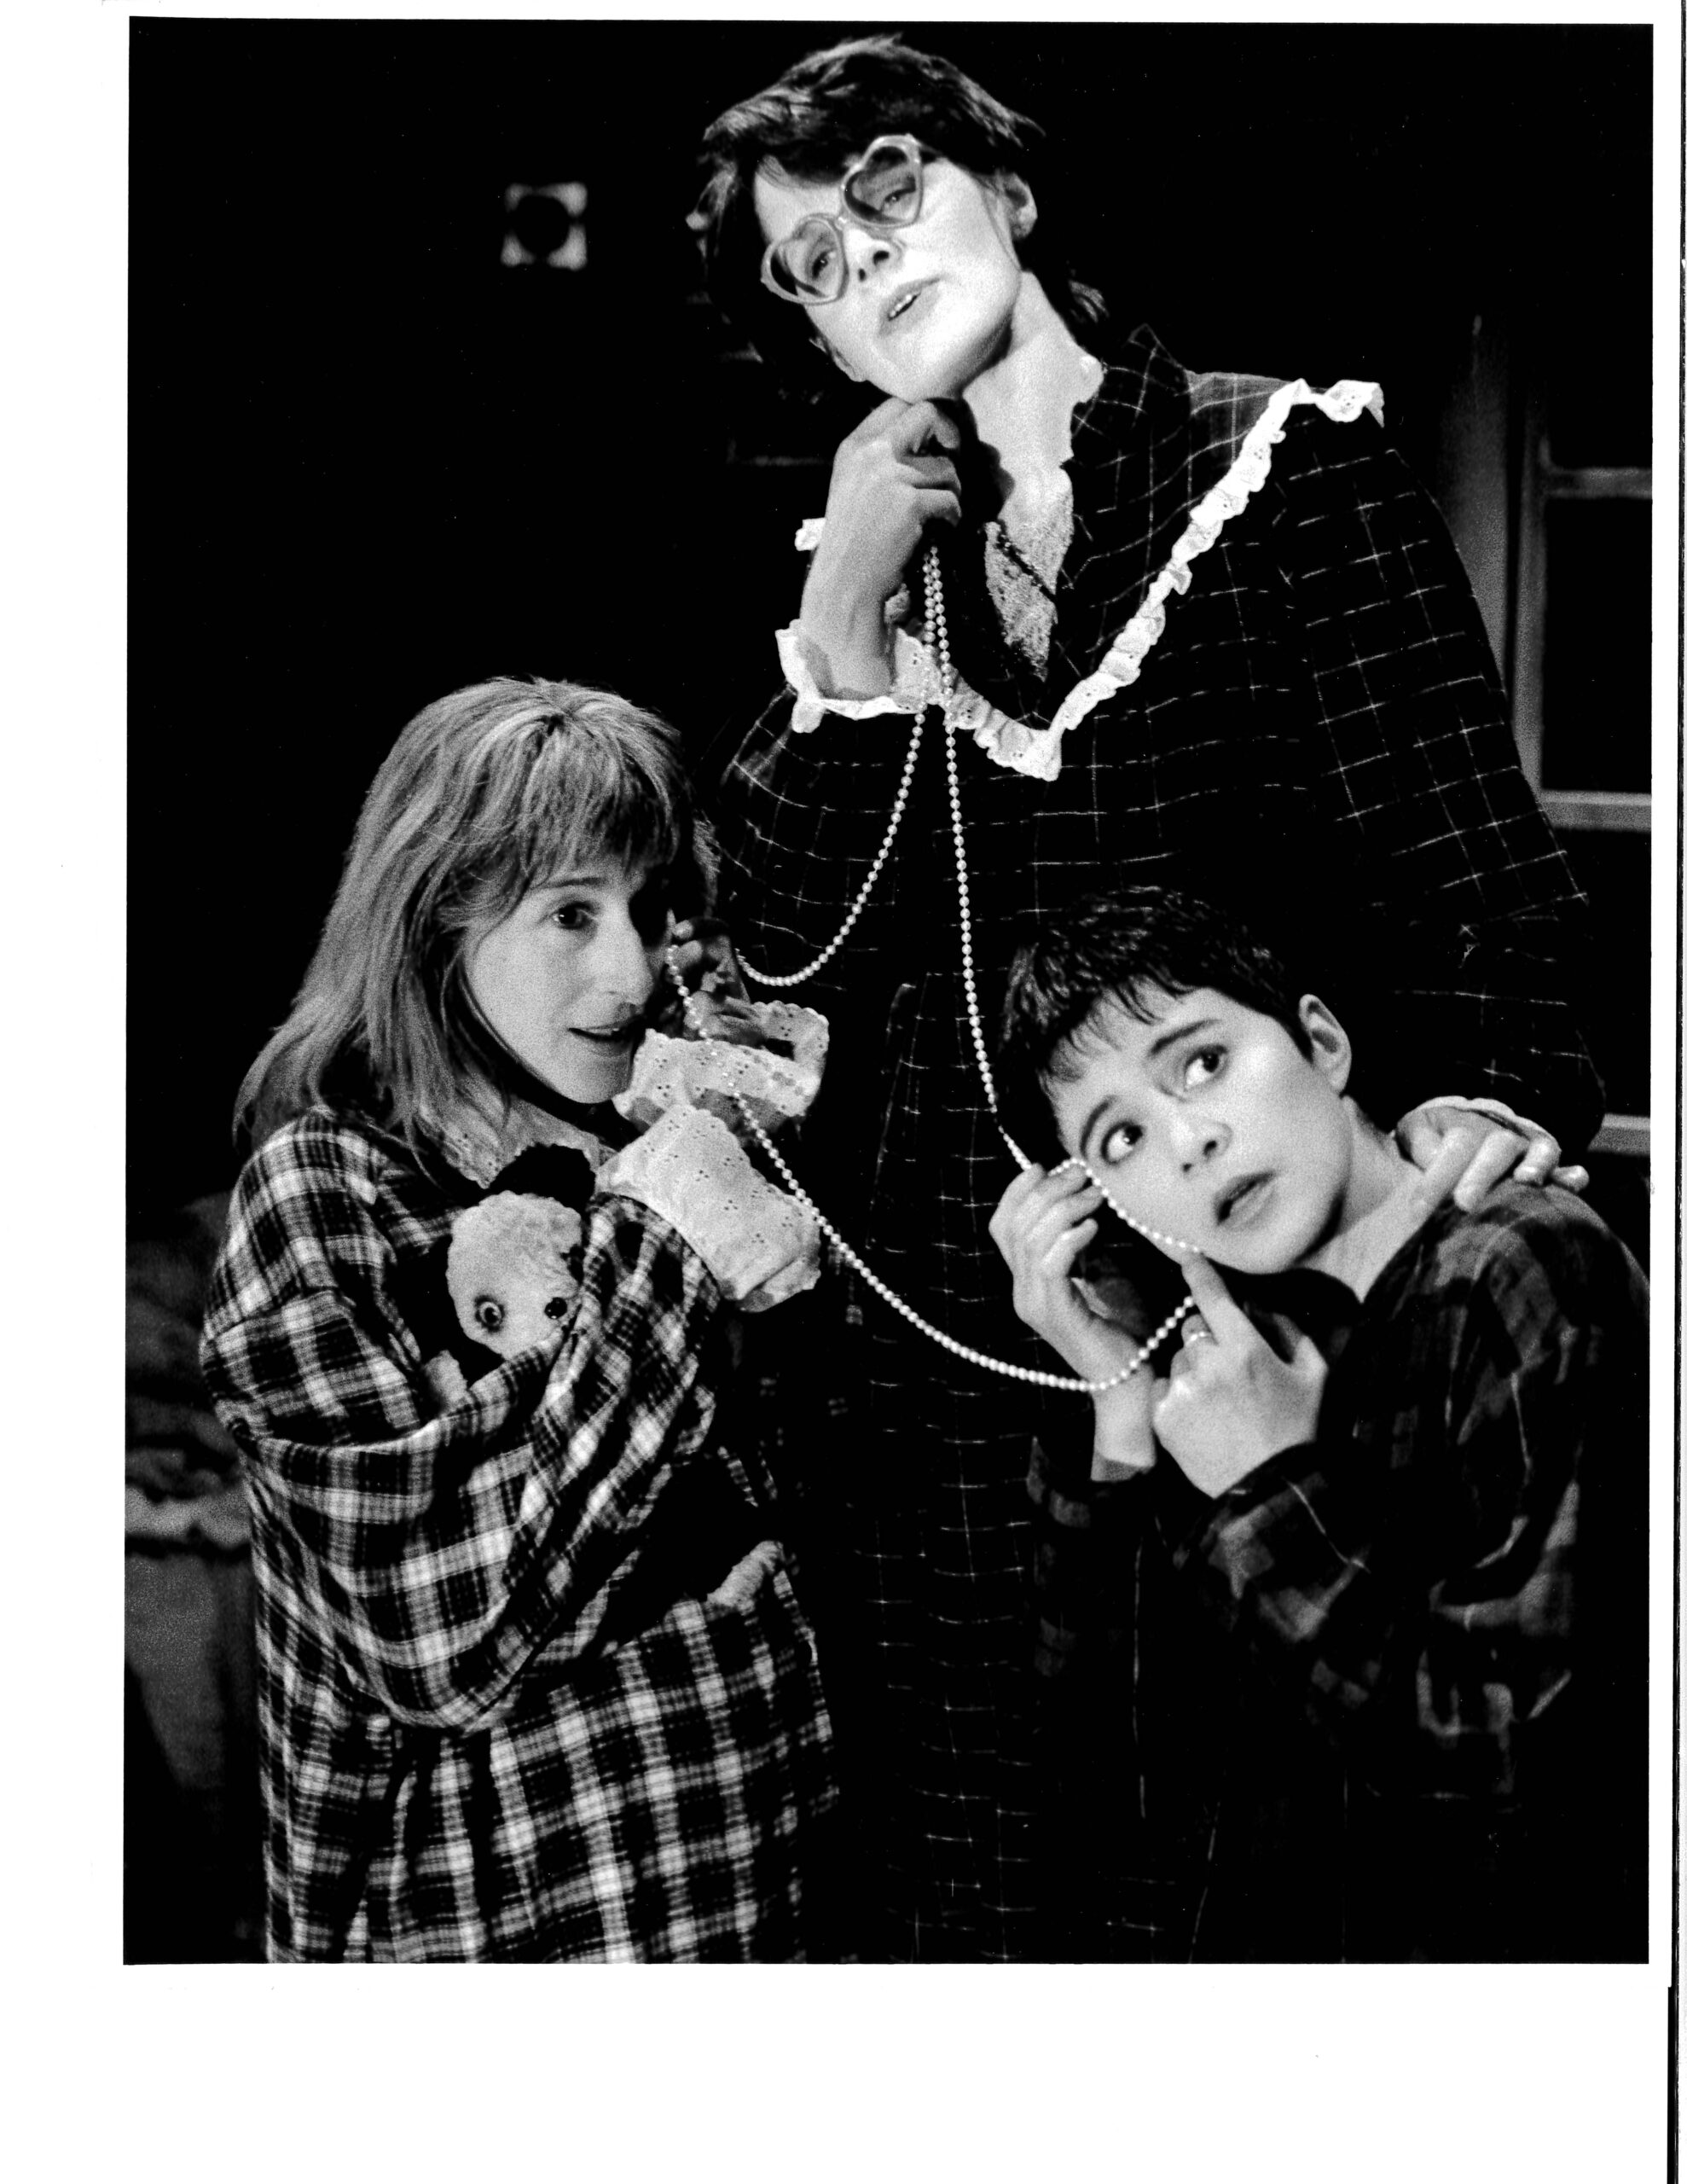 3 Women wearing long sleeved dark tops on the phone. All 3 phone cords are made of pearla and appear to be connected